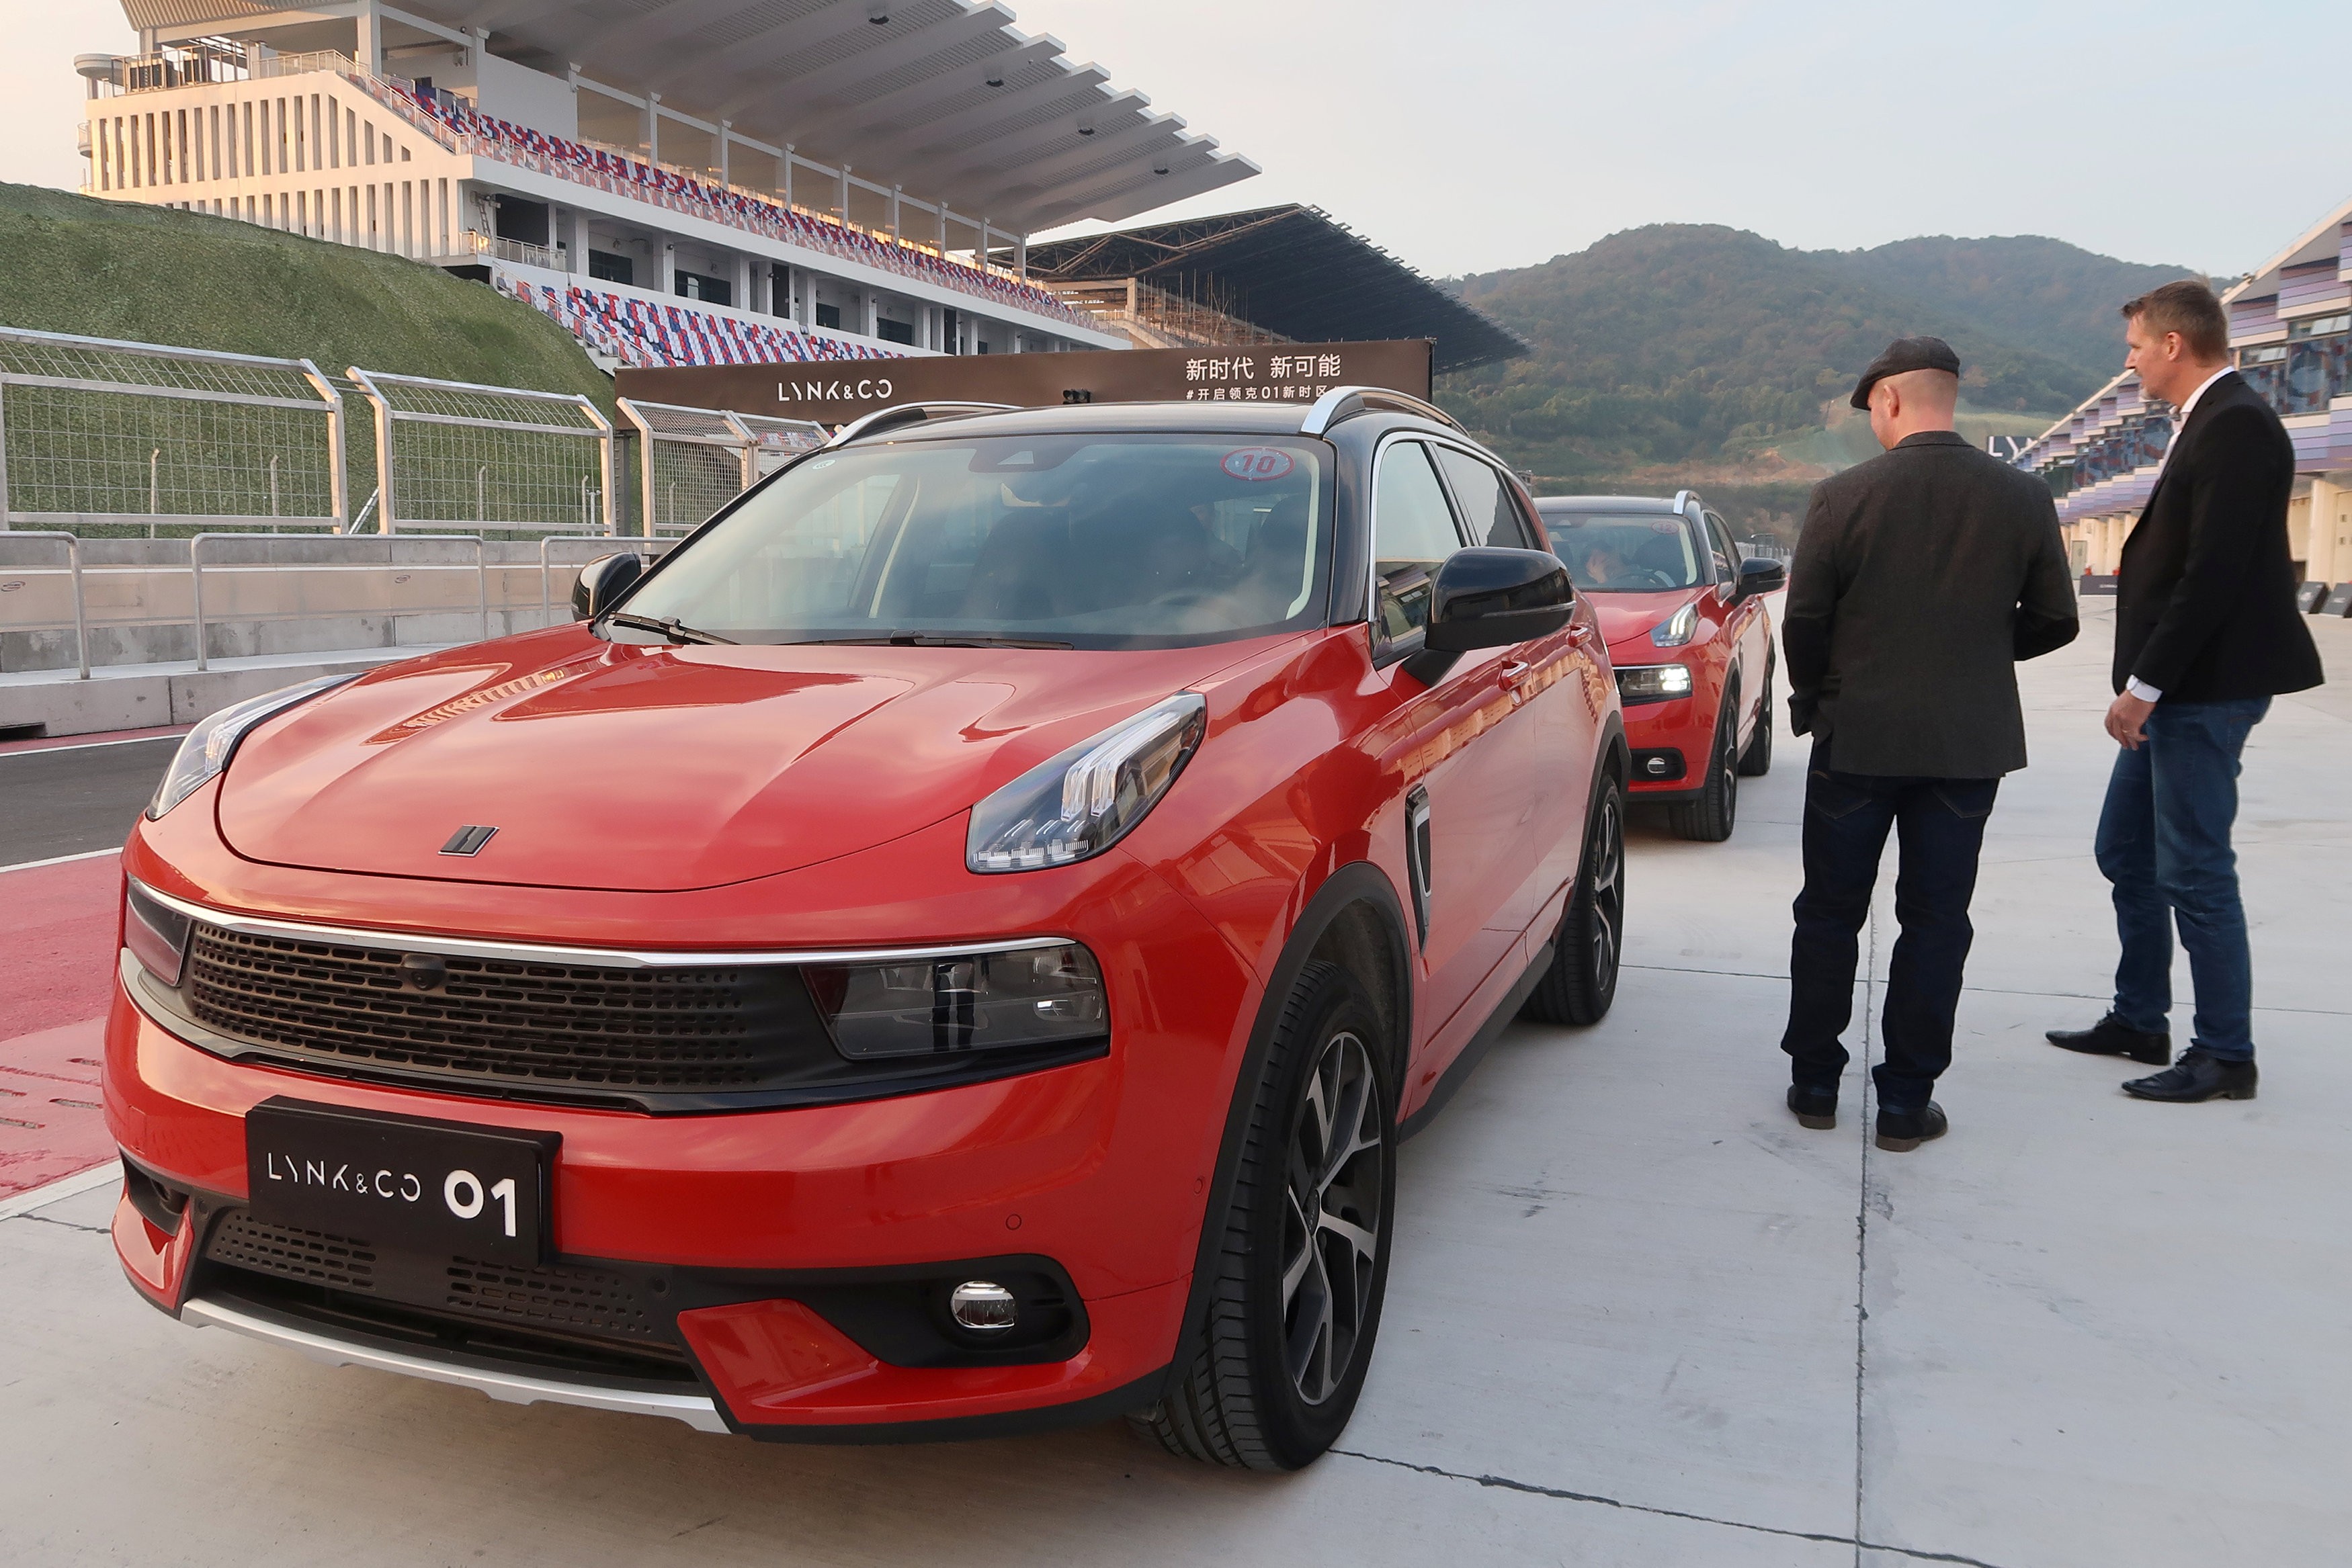 The Lynk 01 sport utility vehicle at a media event in China last month. Photo: Reuters